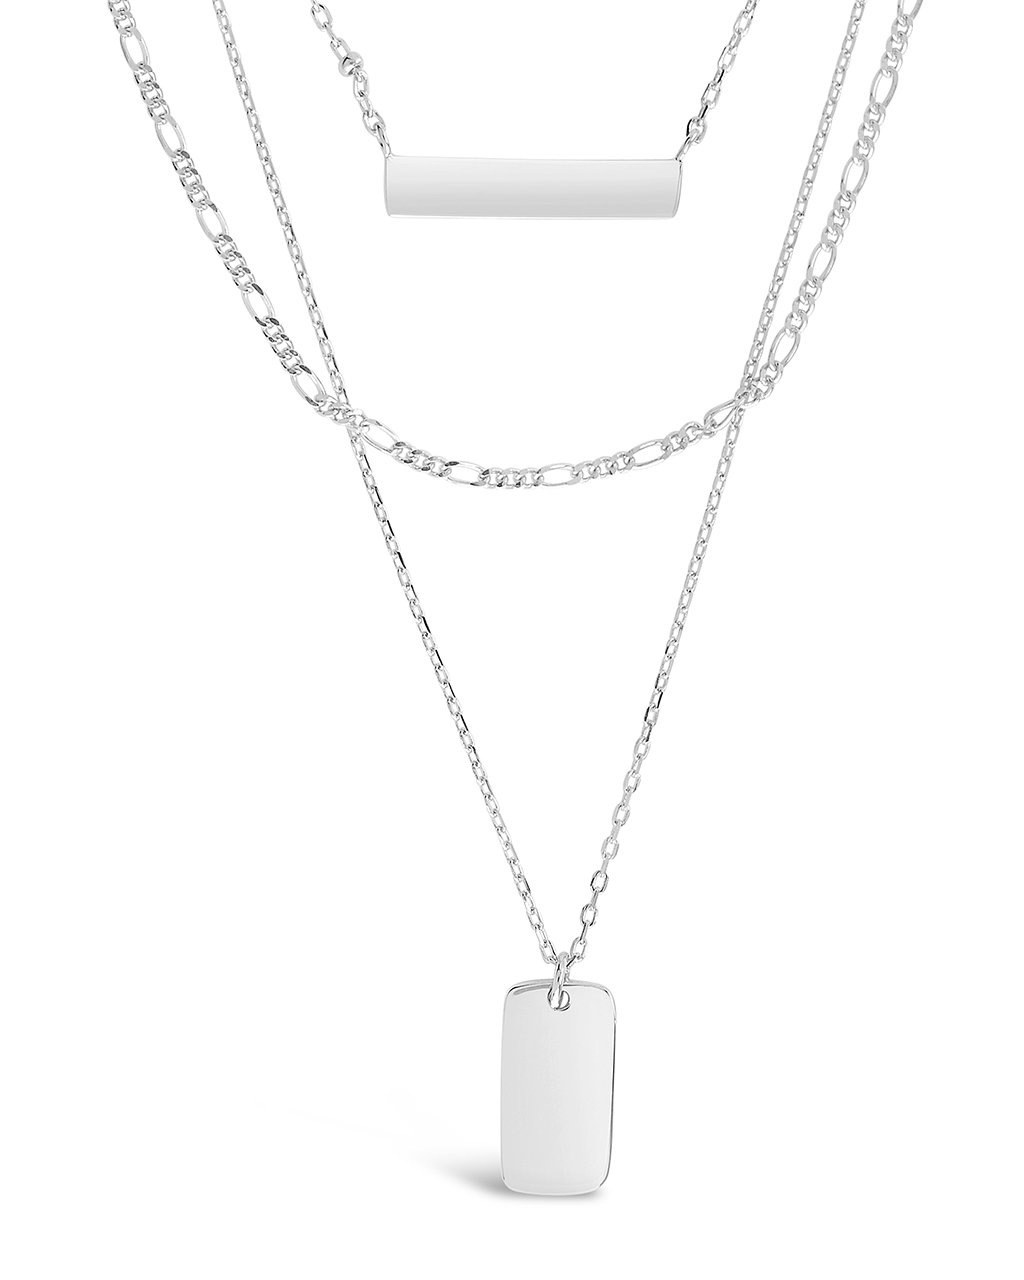 Sterling Silver Layered Bar Necklace - Sterling Forever